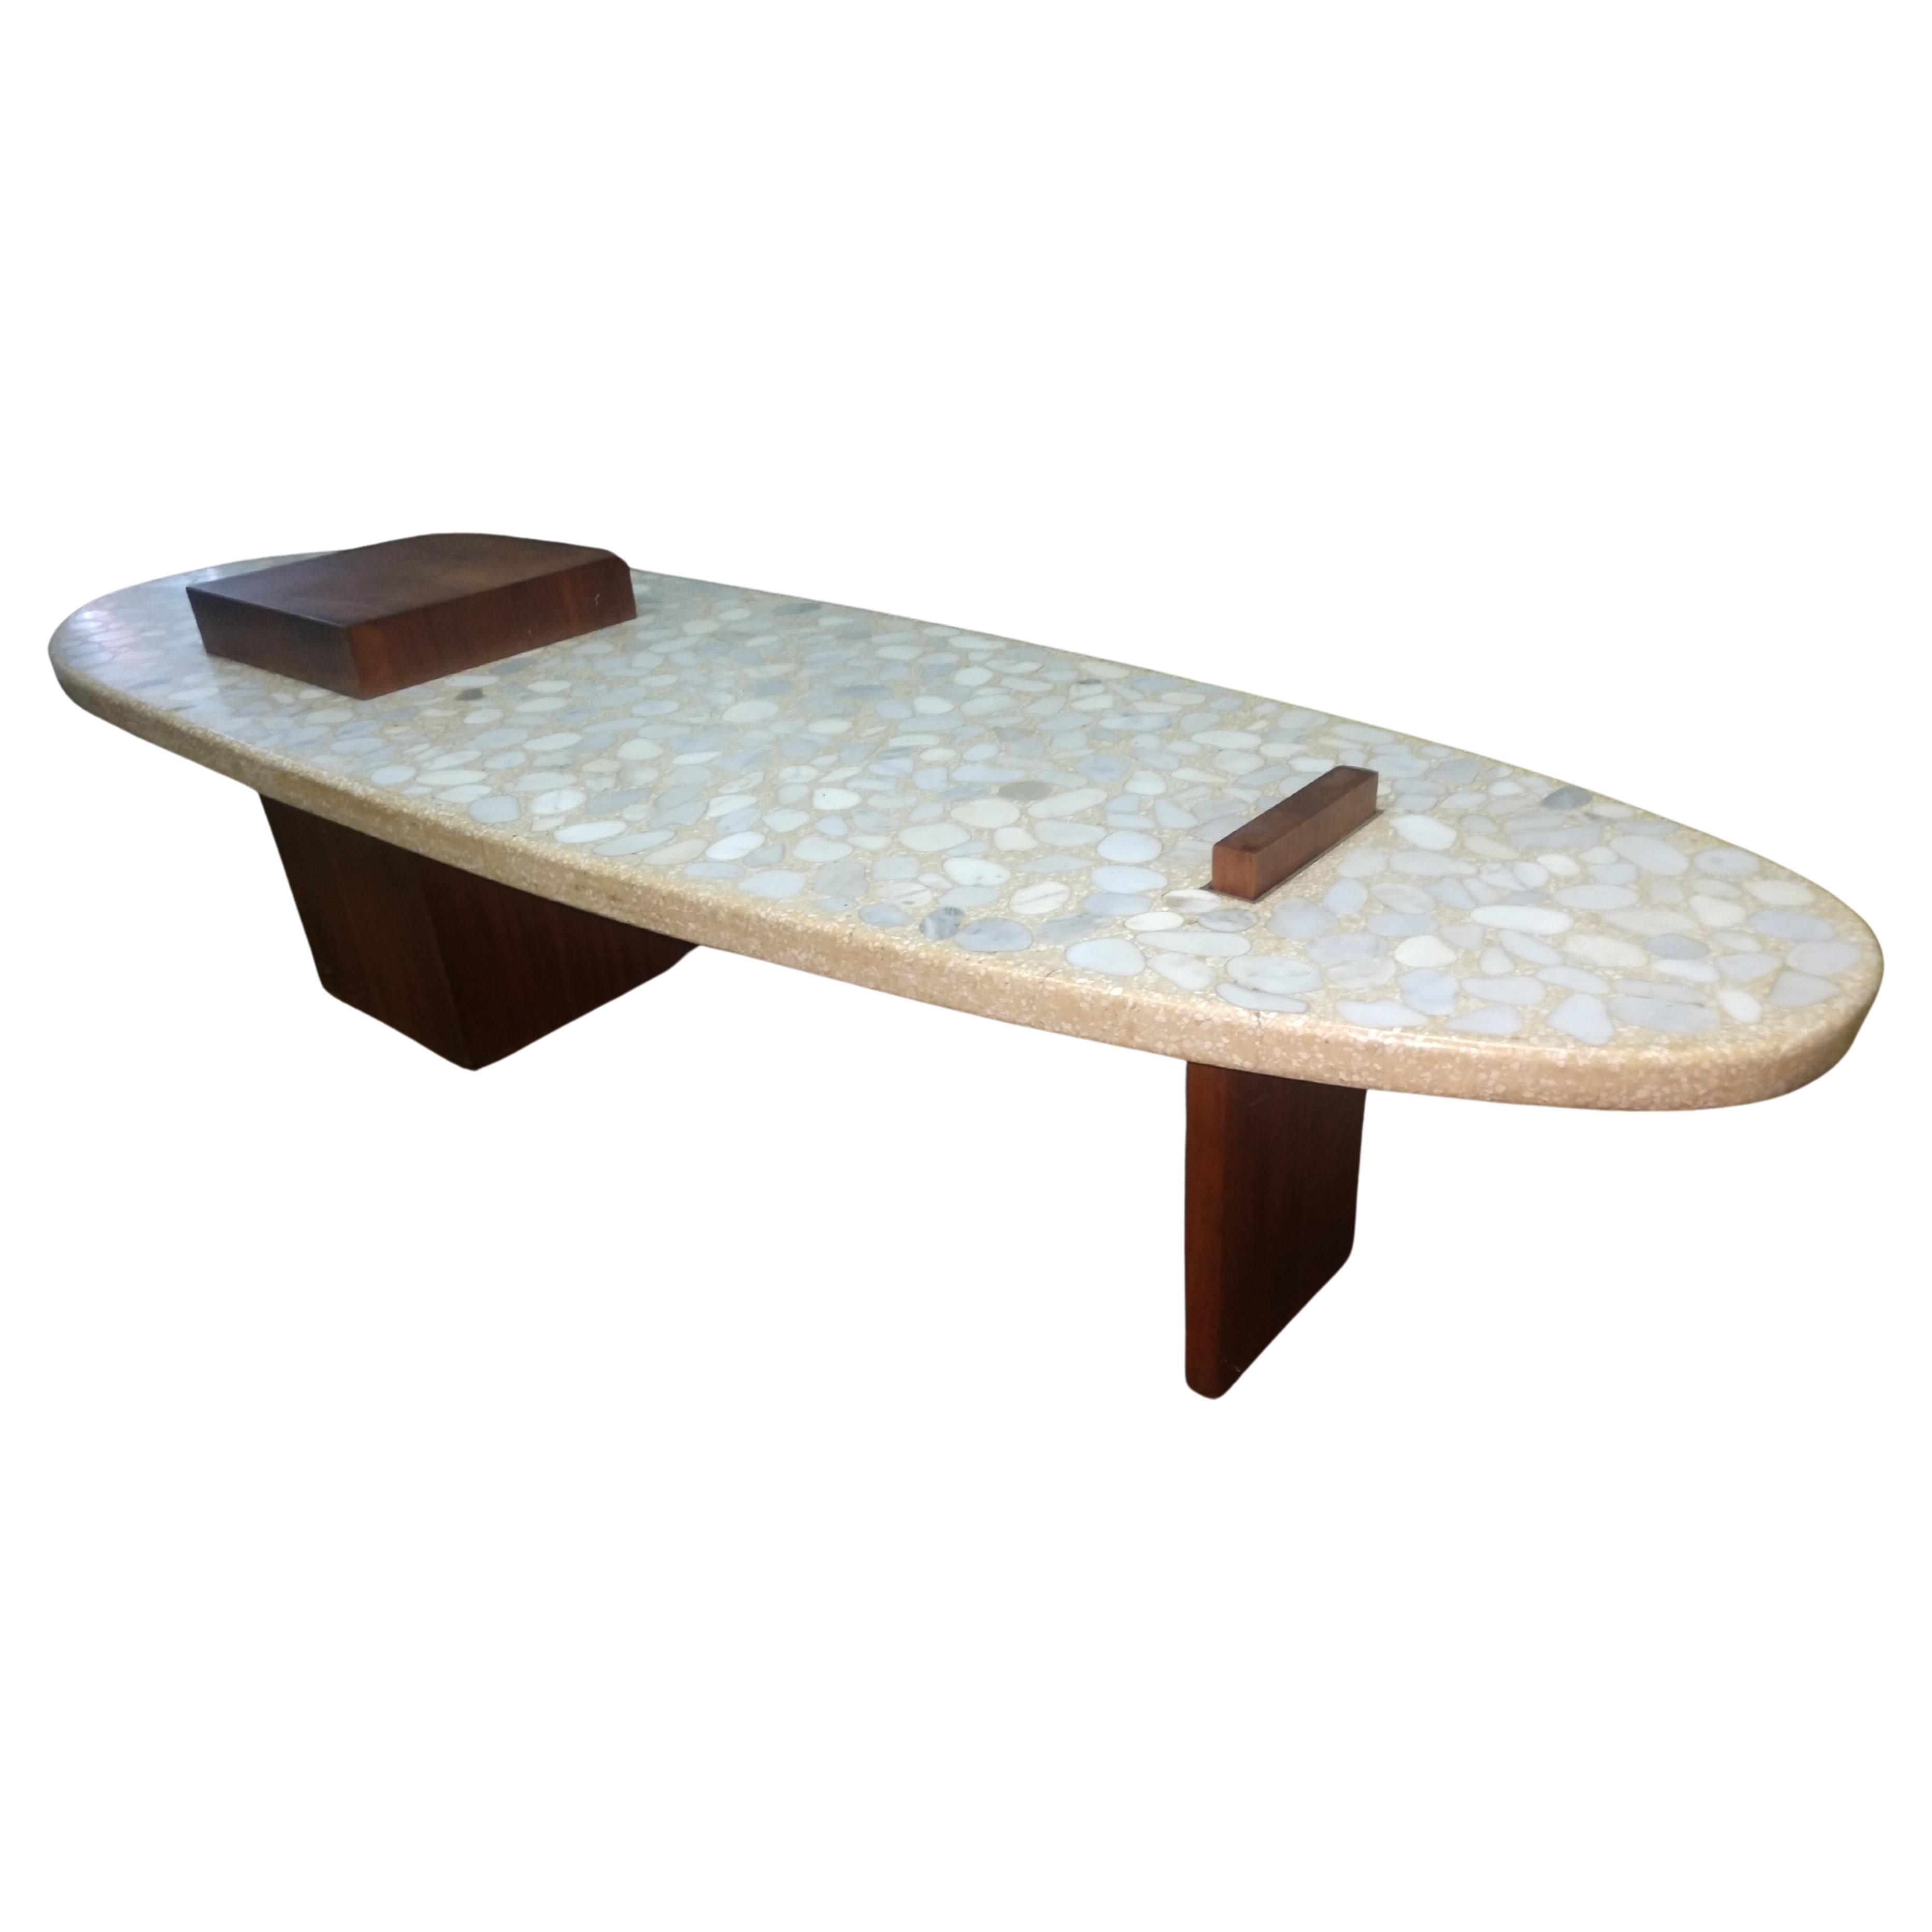 Mid-20th Century Mid-Century Modern Terrazzo Marble and Walnut Cocktail Table by Harvey Probber For Sale